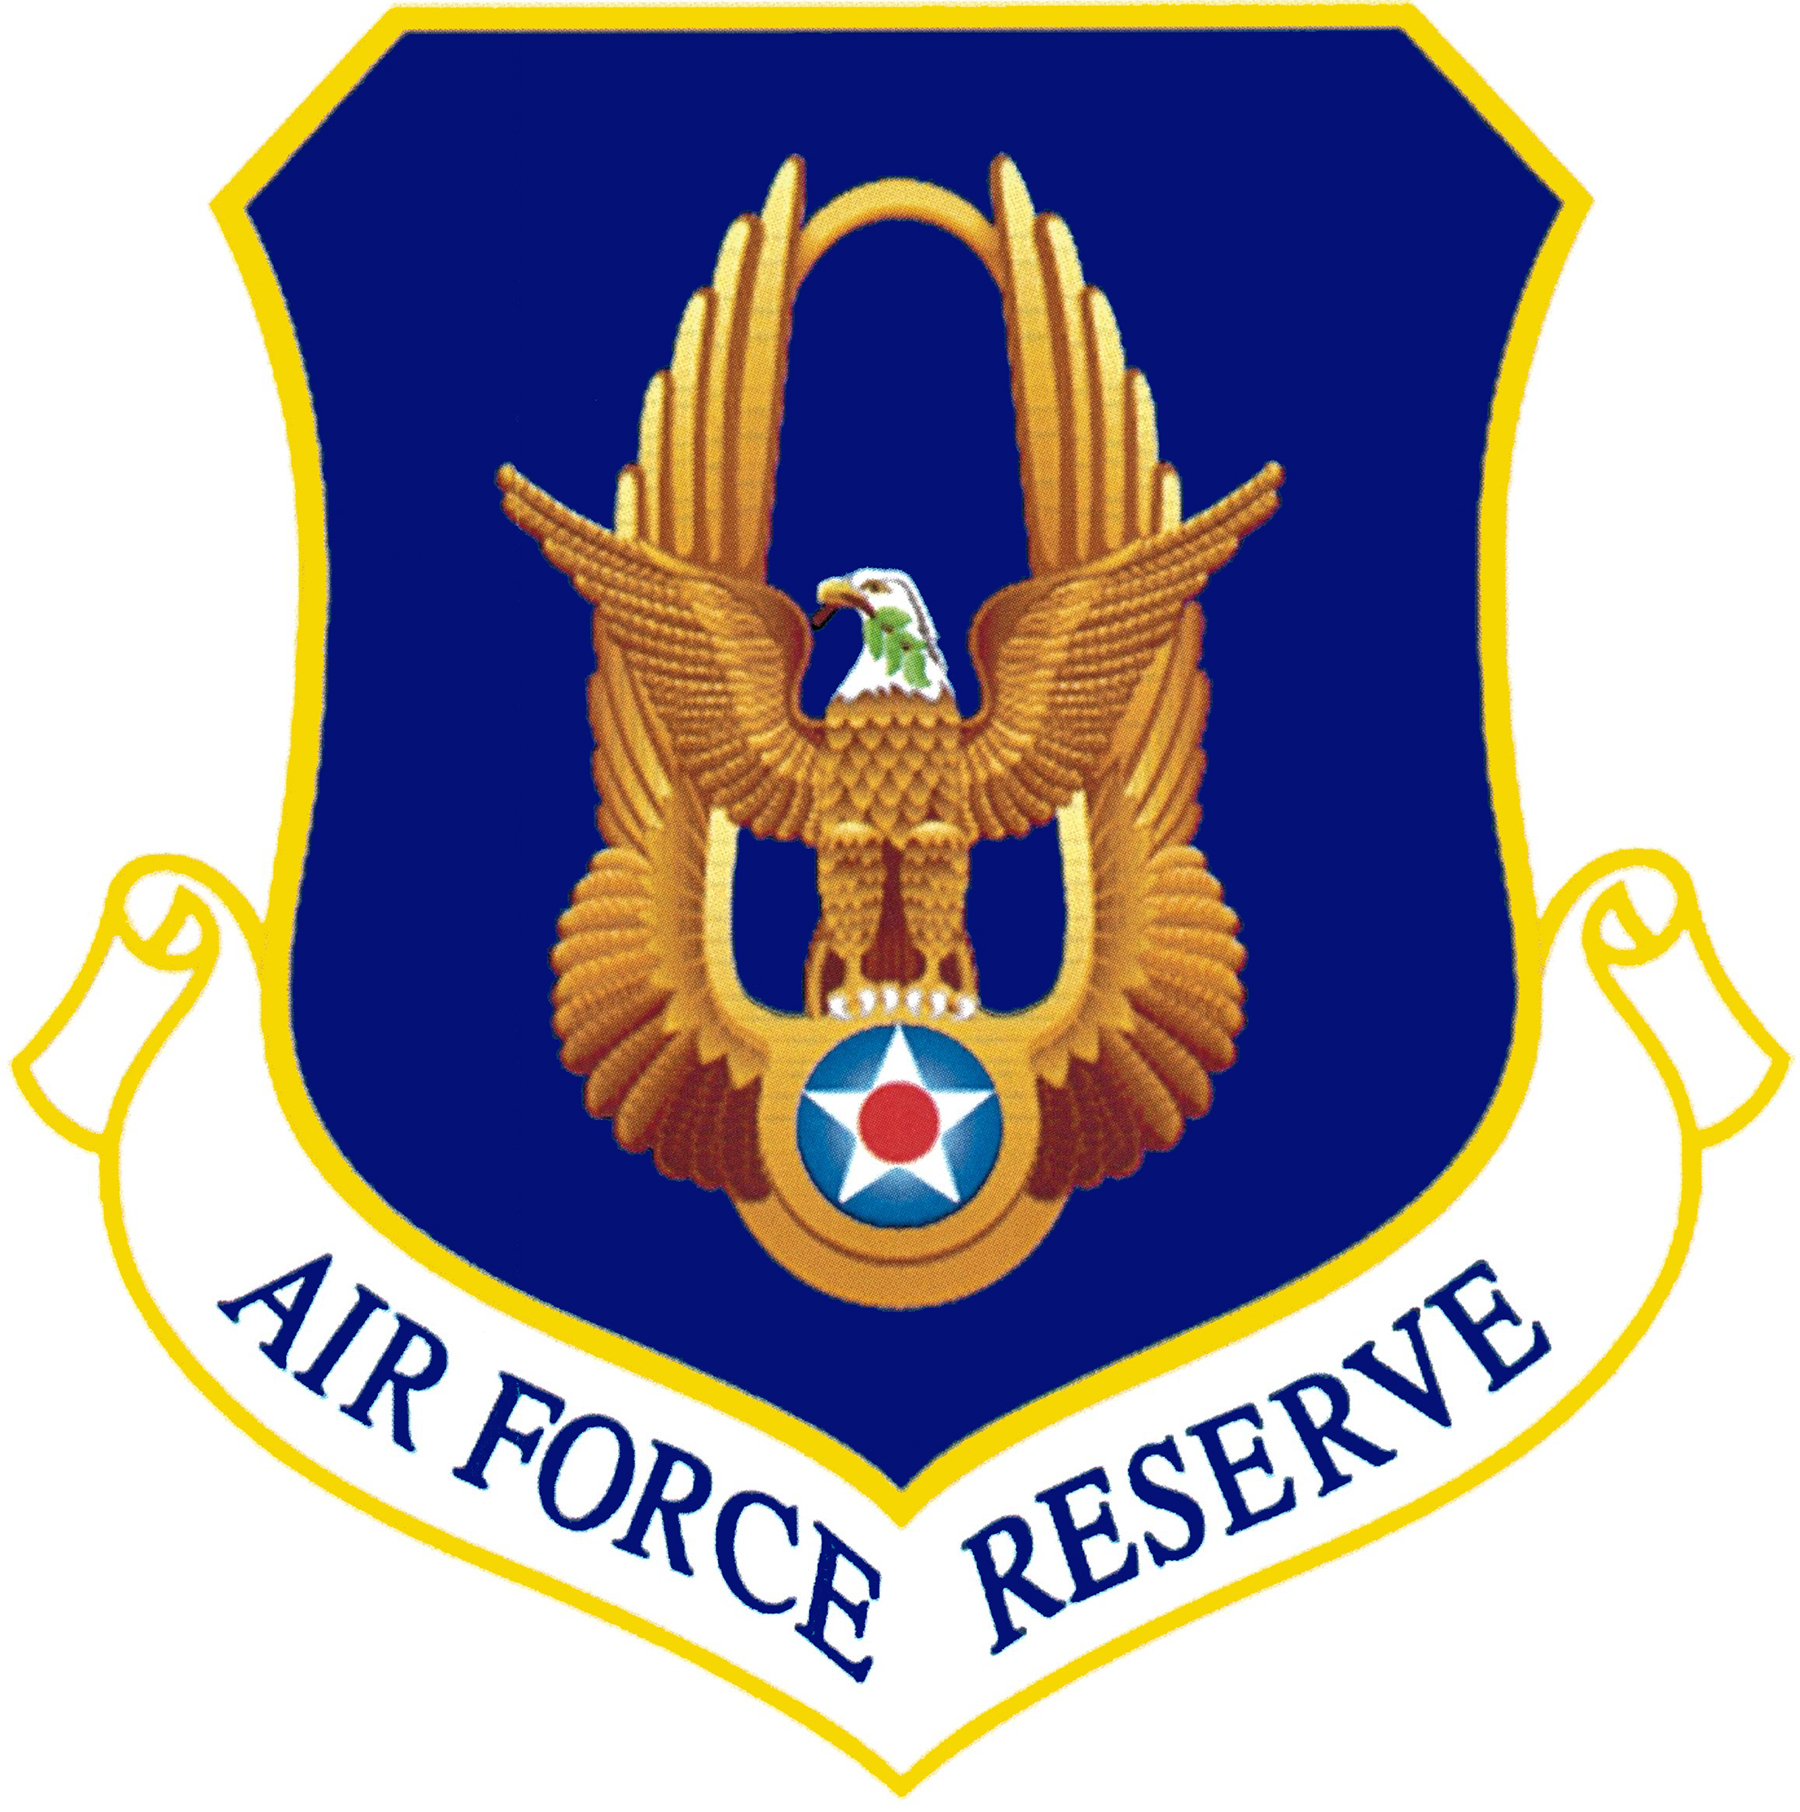 Image result for air force reserves